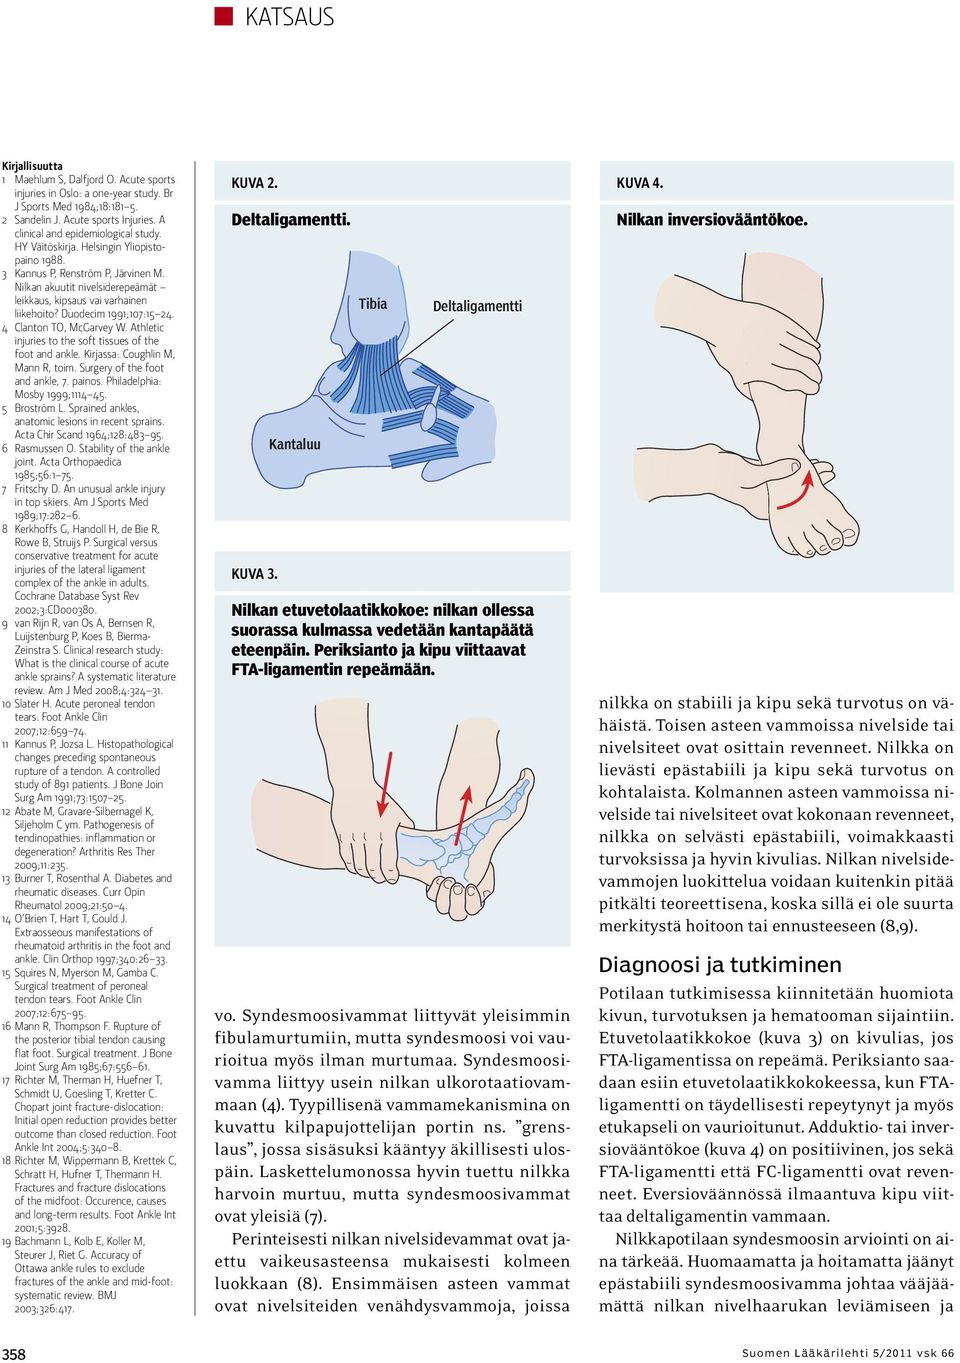 Duodecim 1991;107:15 24. 4 Clanton TO, McGarvey W. Athletic injuries to the soft tissues of the foot and ankle. Kirjassa: Coughlin M, Mann R, toim. Surgery of the foot and ankle, 7. painos.